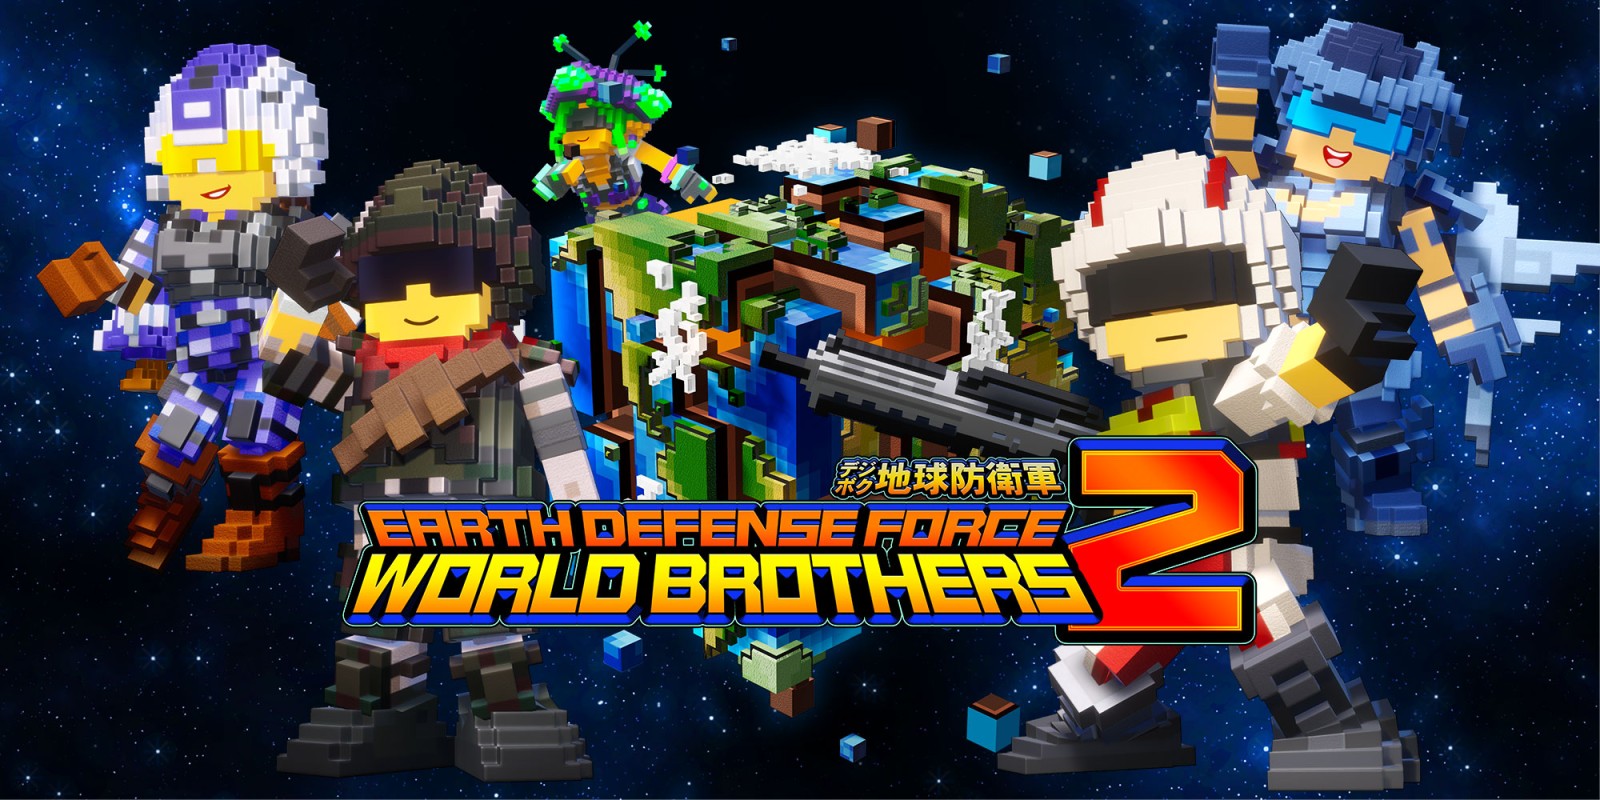 EARTH DEFENSE FORCE: WORLD BROTHERS 2